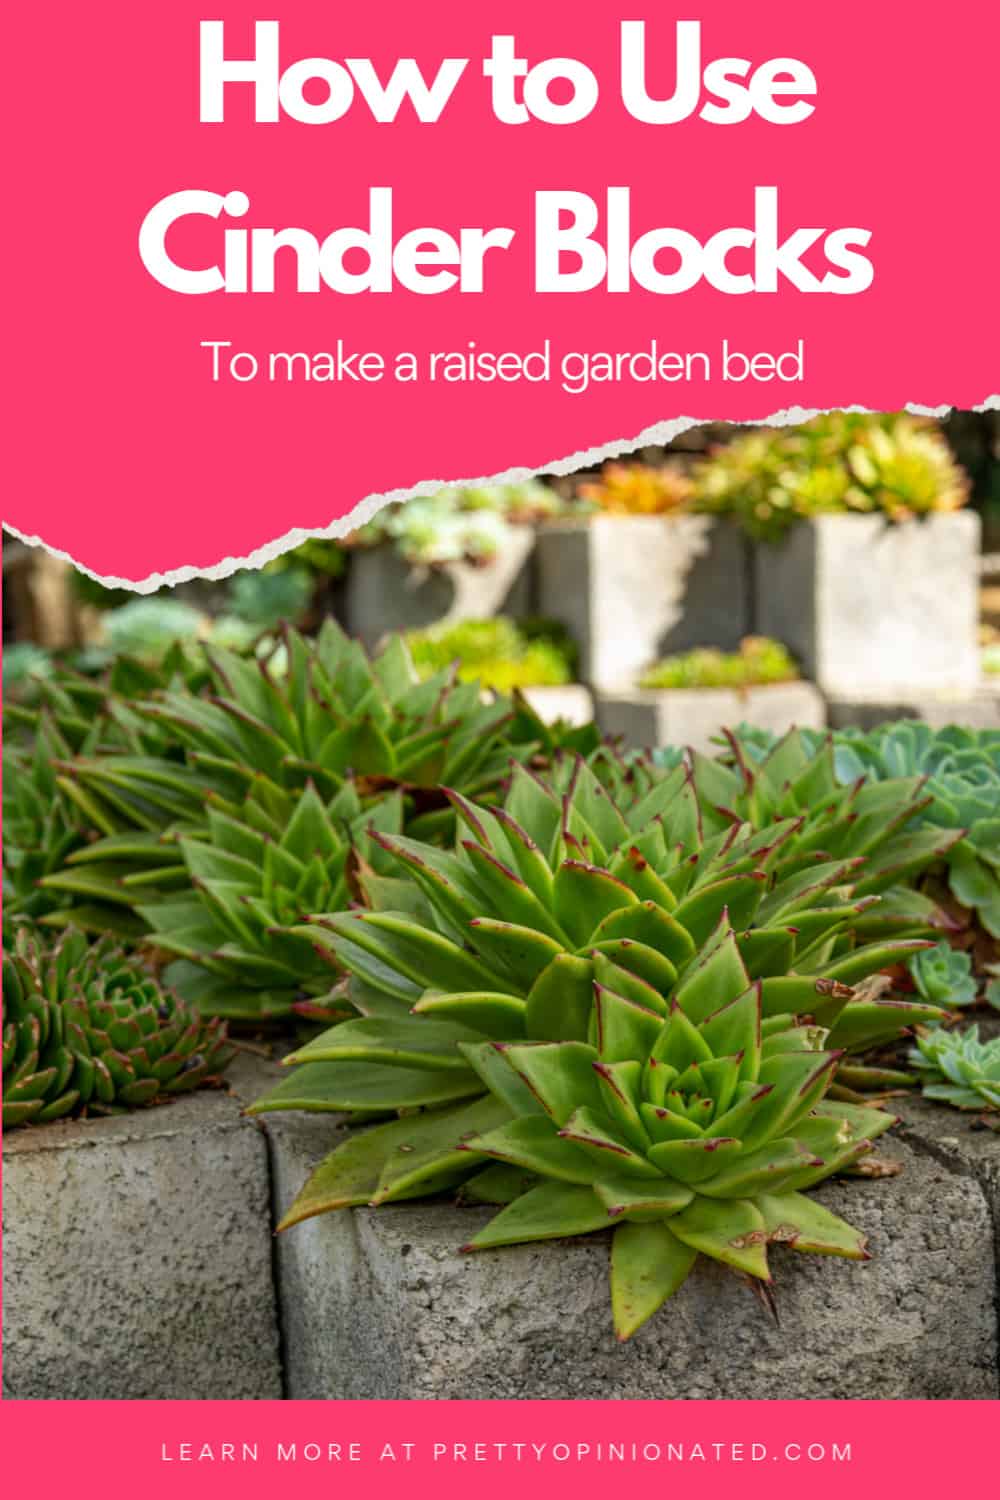 If you looked at that title and thought, "Ewww, that doesn't sound very classy!" then think again. Cinder blocks are actually incredibly versatile. With a little creativity, they make the perfect foundation for a raised garden bed.